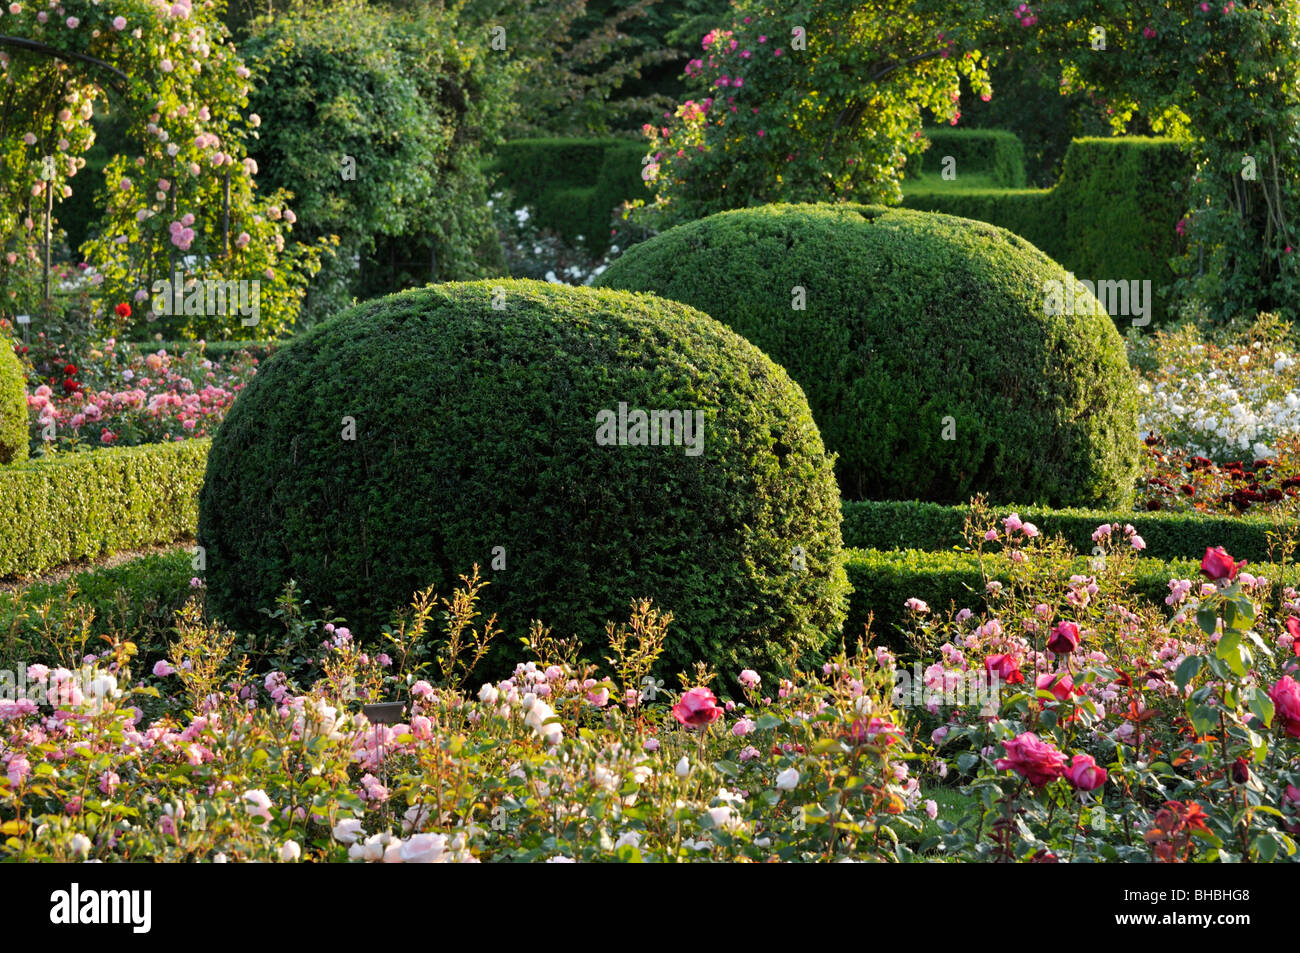 Common yew (Taxus baccata) with spherical shape in a rose garden, Britzer Garten, Berlin, Germany Stock Photo